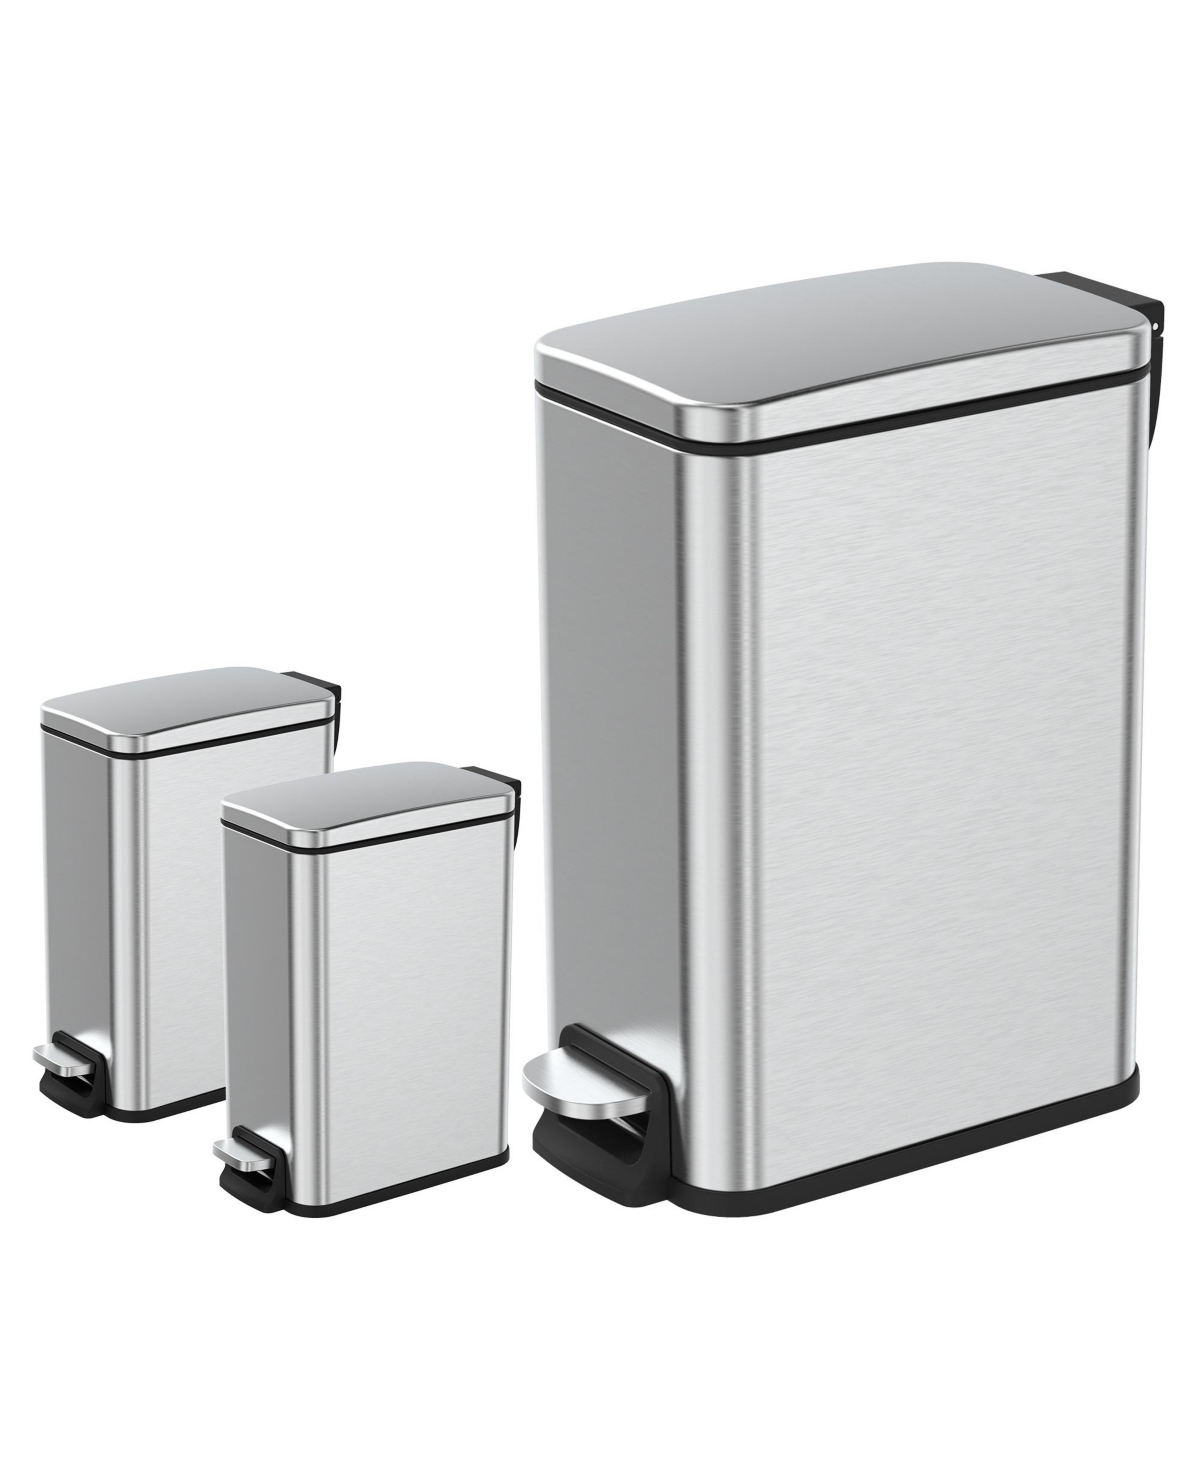 11.9 Gallon/ 45 Liter + Two 1.6 Gallon/6 Liter Rectangular Step-on Trash Can Set For Bathroom and Kitchen - Silver